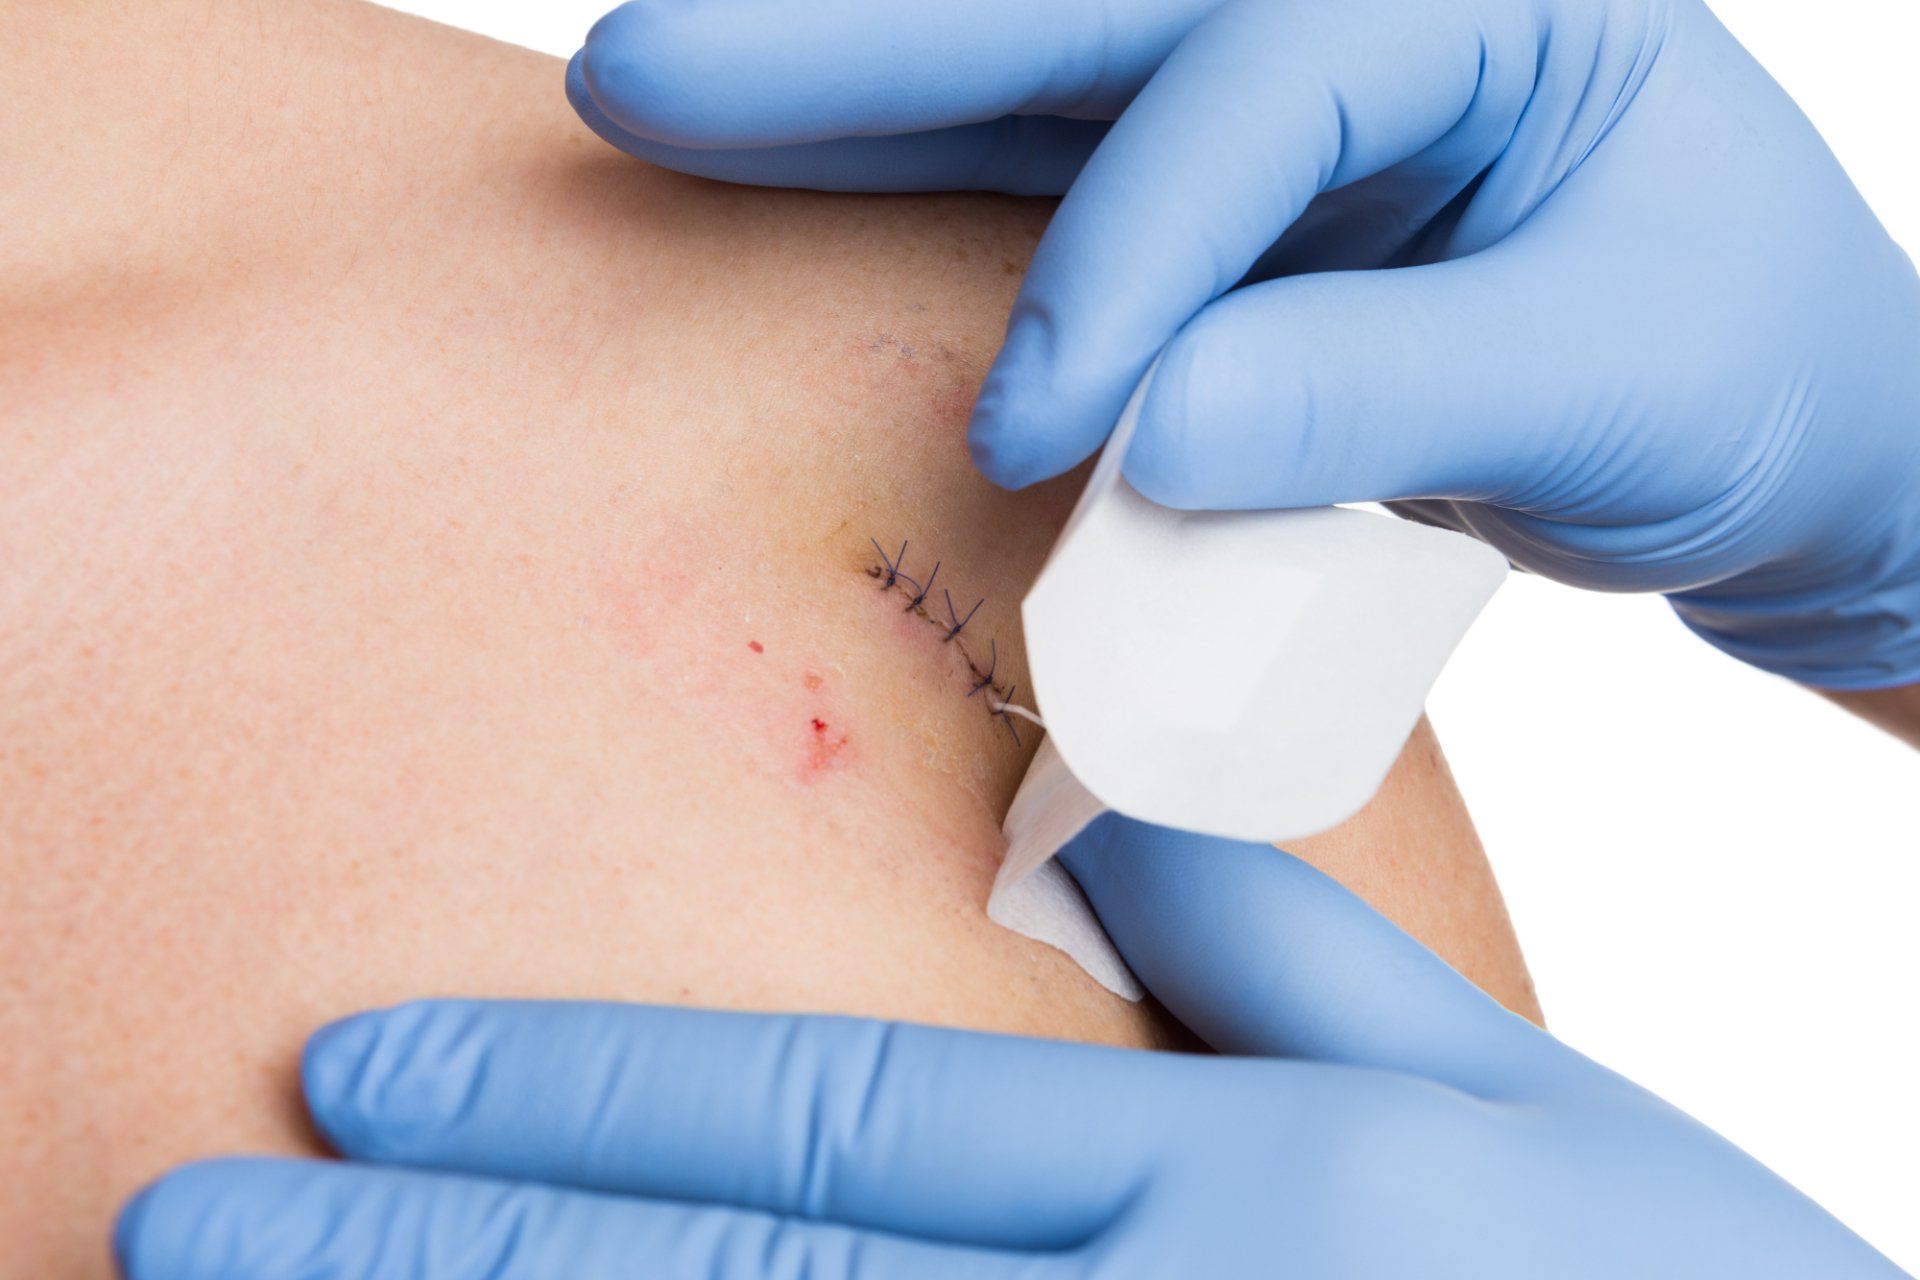 dermatologist applies bandage over skin surgery wound